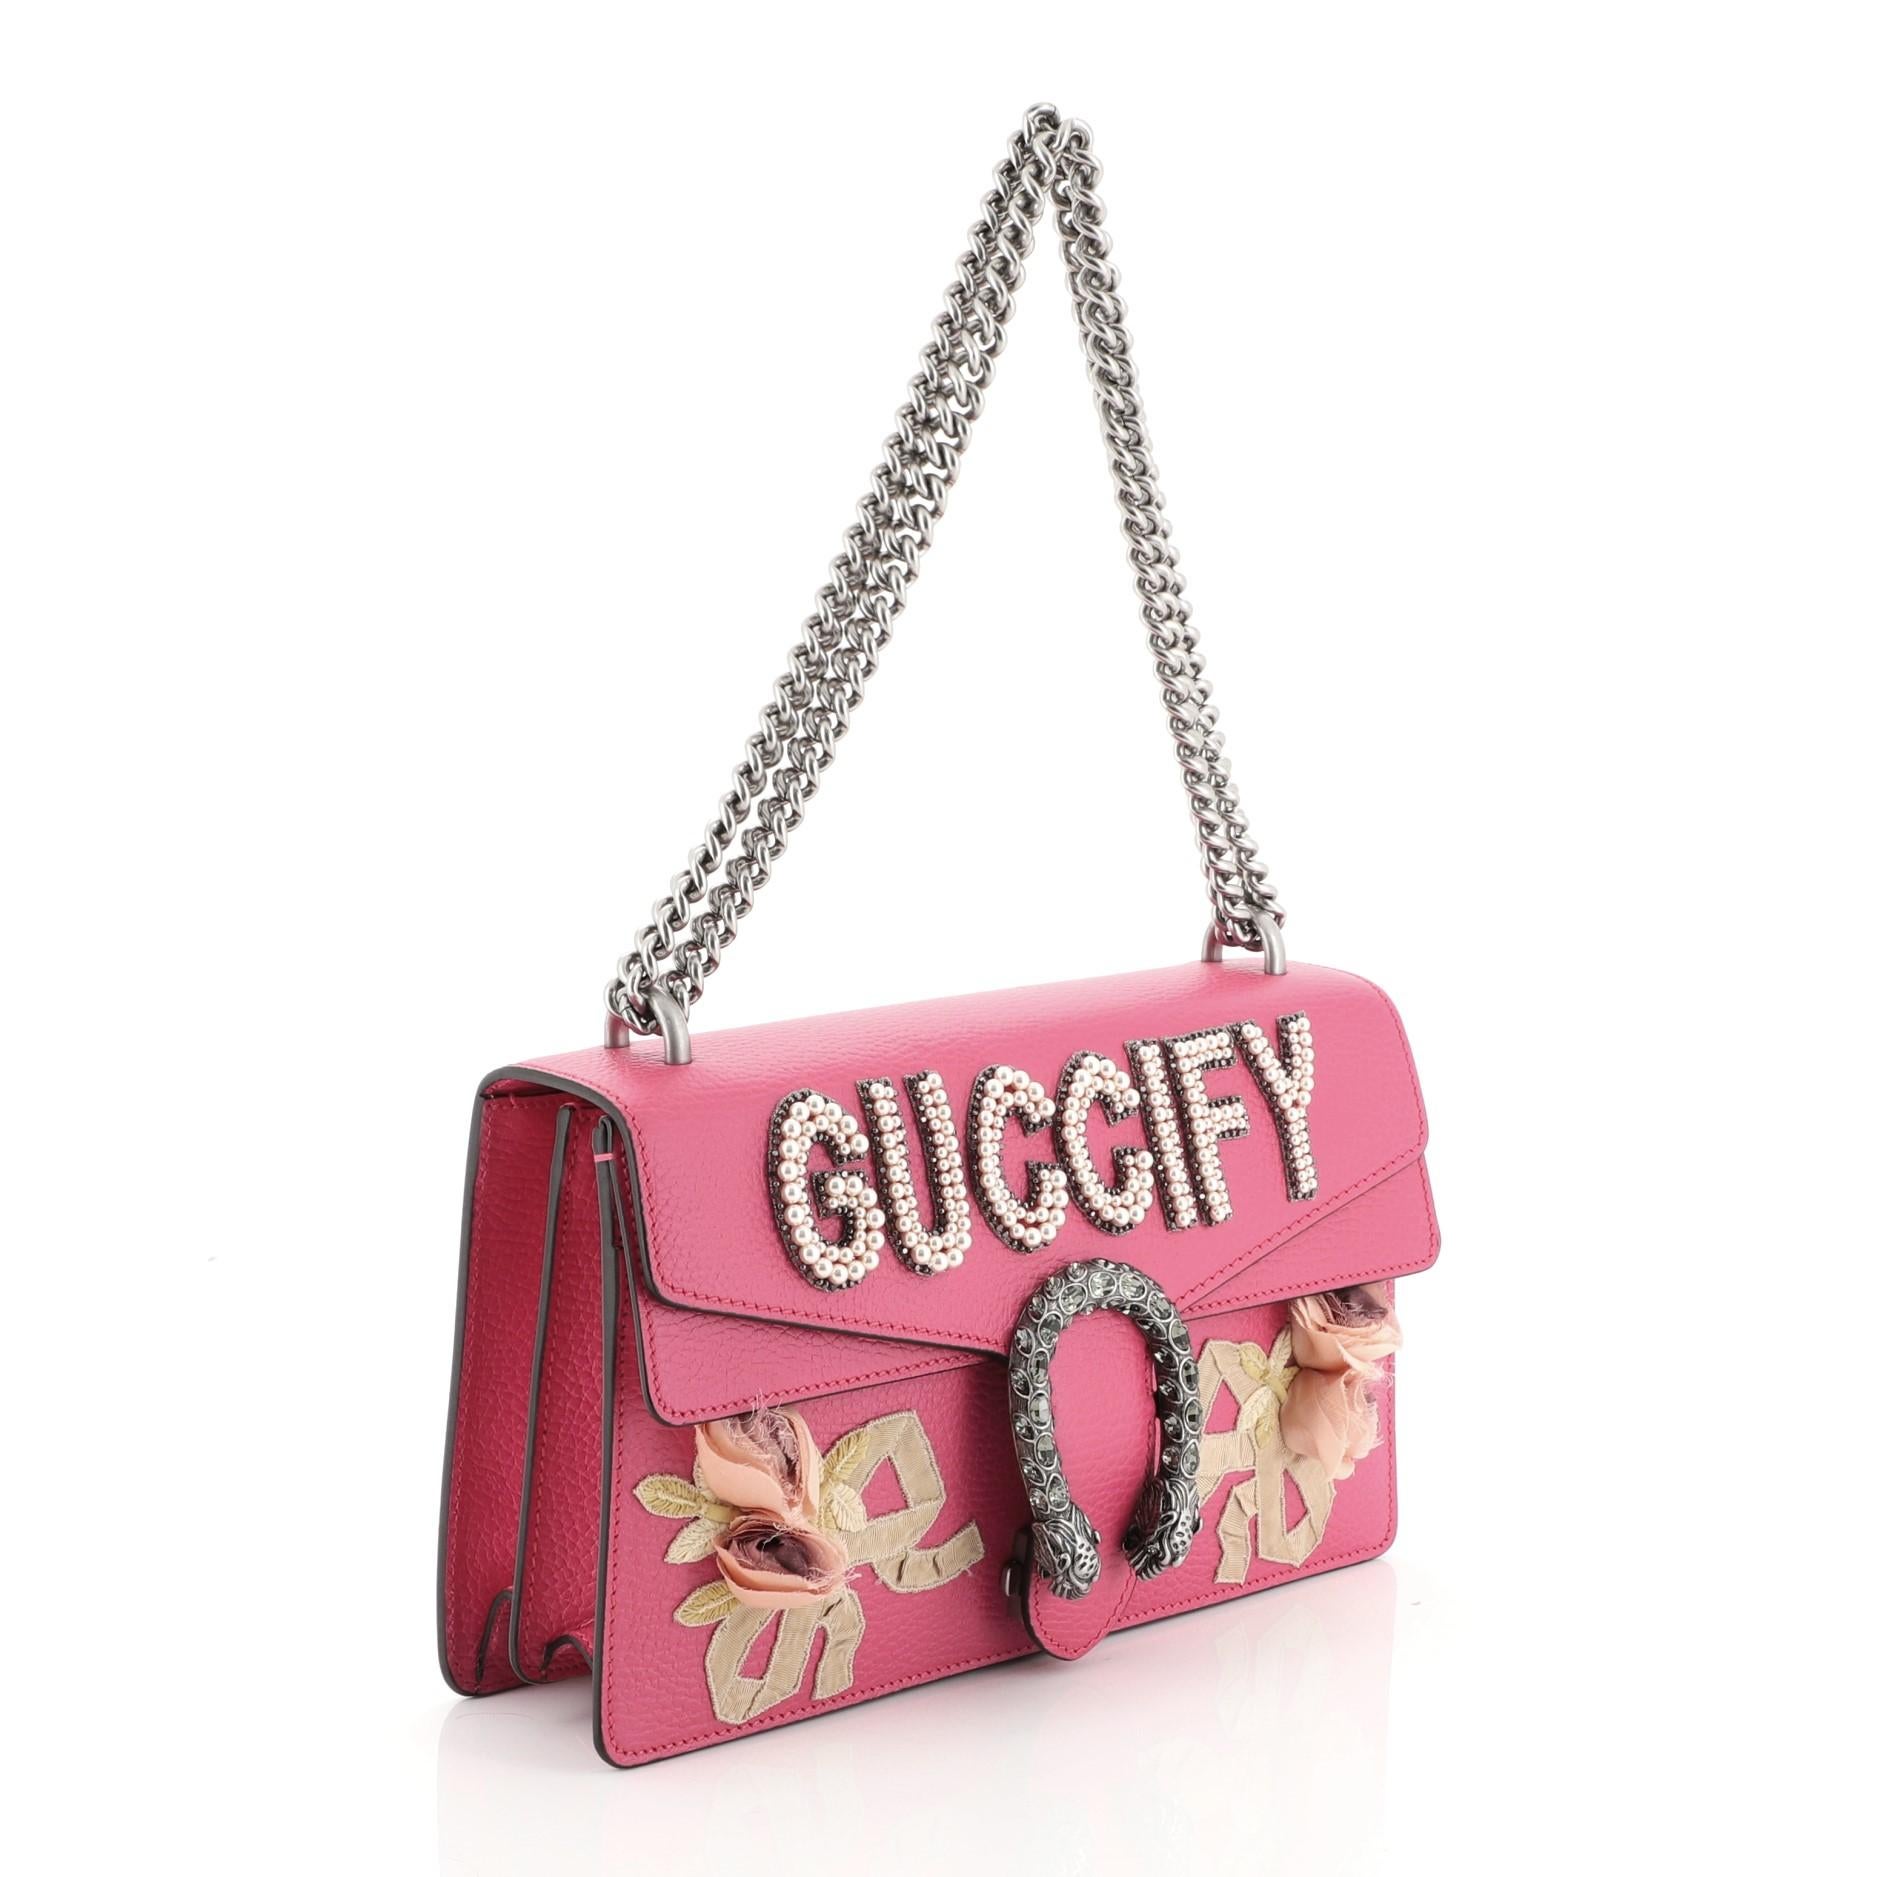 This Gucci Dionysus Bag Embellished Leather Small, crafted from pink leather, features a chain link strap, floral appliques and 